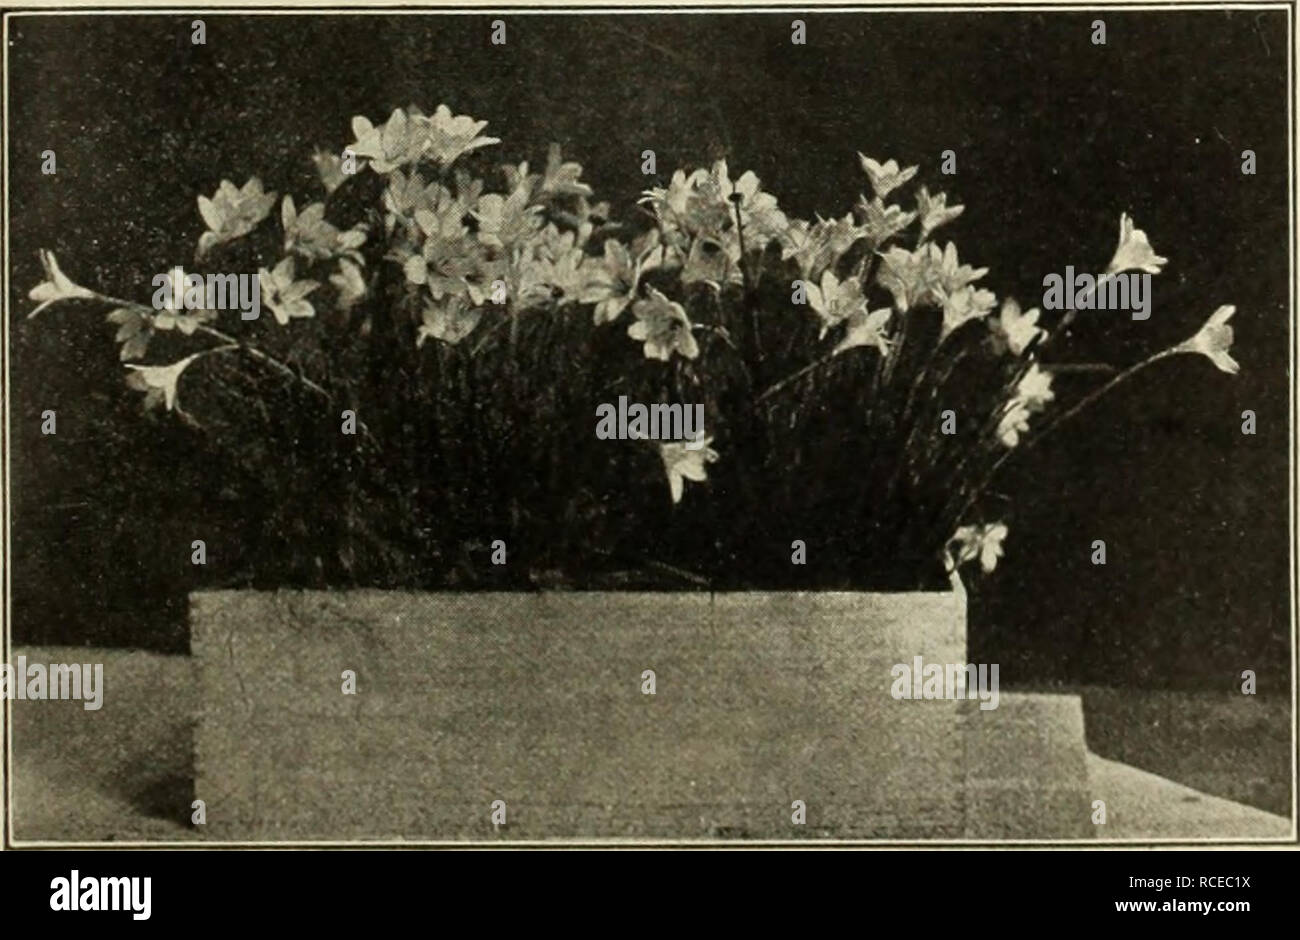 . Dingee guide to rose culture : 1917. Maiden Hair Fern. M.AIDE'NH.AIR 1-&quot;ERN (Adiantum cuneatum)—The best known table Fern, with dainty, lacy fronds, unlike any other. 15c and 25c each, postpaid. ALTERN.ANTHER.S—-Compact bedder. Two colors, red and yel- low variegated. 10c each, any 6 for 50c; any 15 for .$1.00. CISSl'S DISCOLOR (Trailing Begonia)—The leaves are long, heart-shaped, .and as hand.somely marbled and mottled as a Rex Begonia. For hanging baskets. Strong plants, 1,5c each; 4 for .5&lt;)c; larger size, 20c each. S.I.VI.V (Scarlet Sage)—Unequalled for dazzling show of fiery s Stock Photo